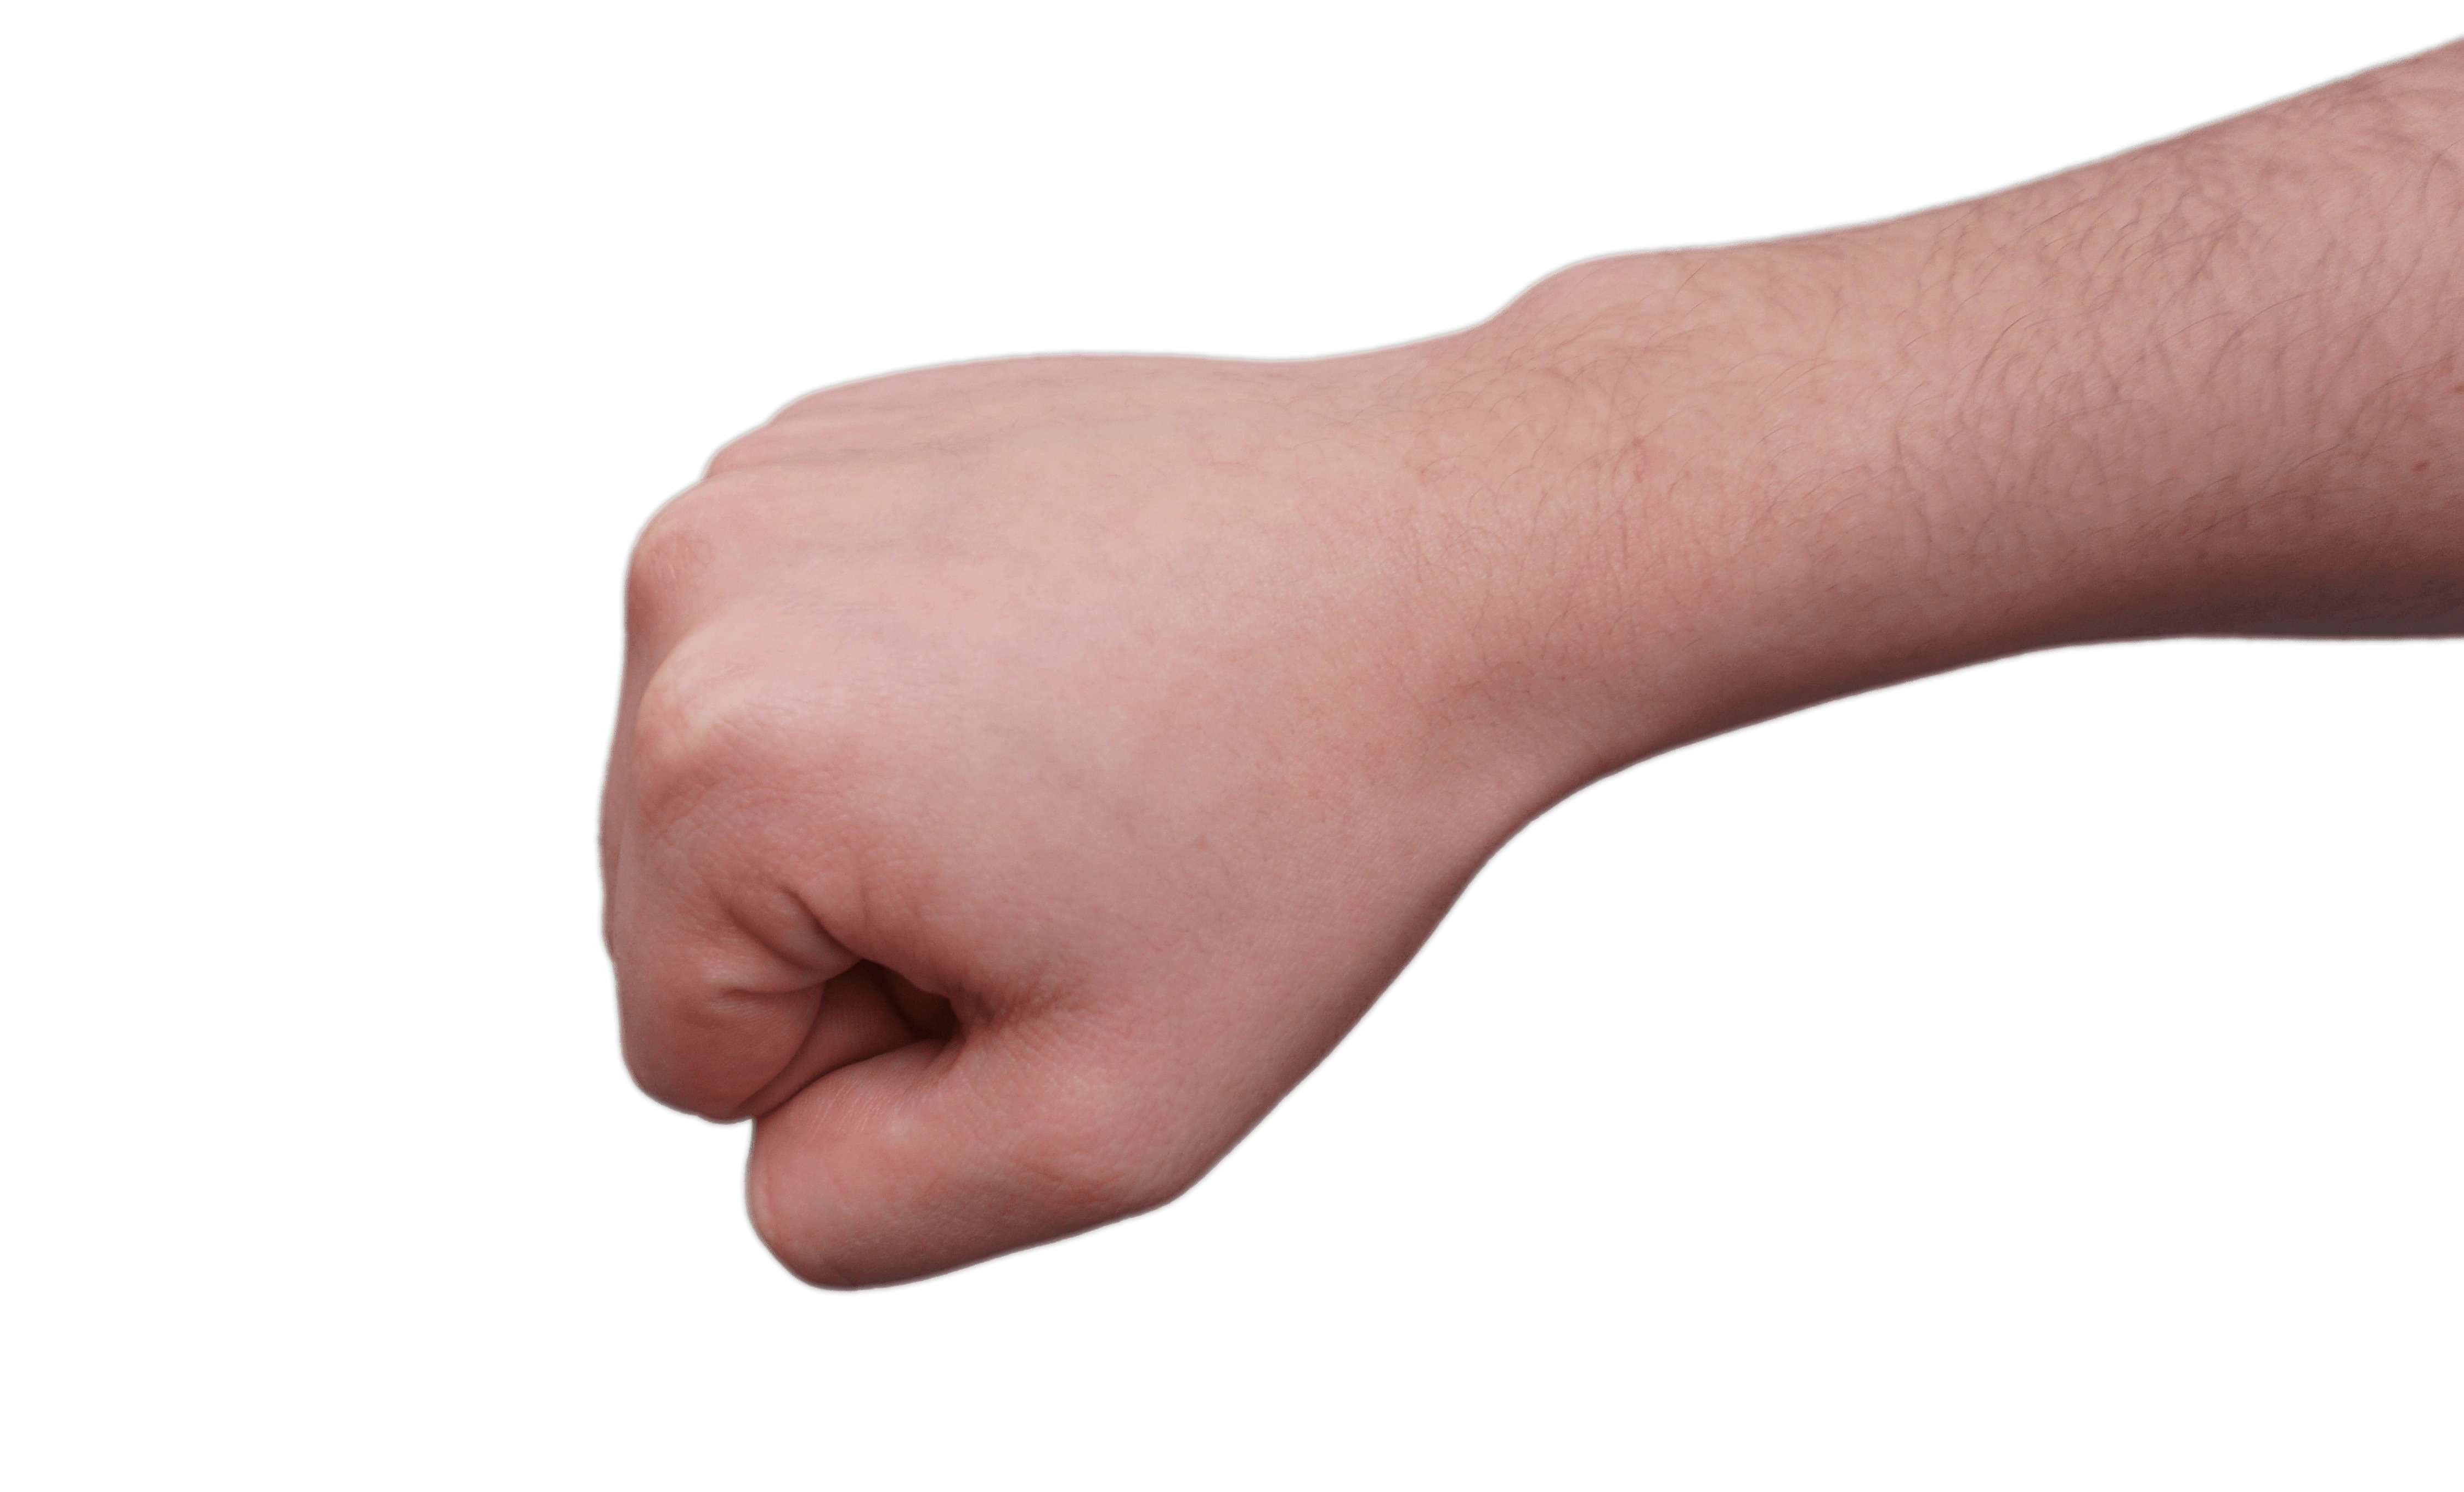 Clenched Fist and Forearm icons